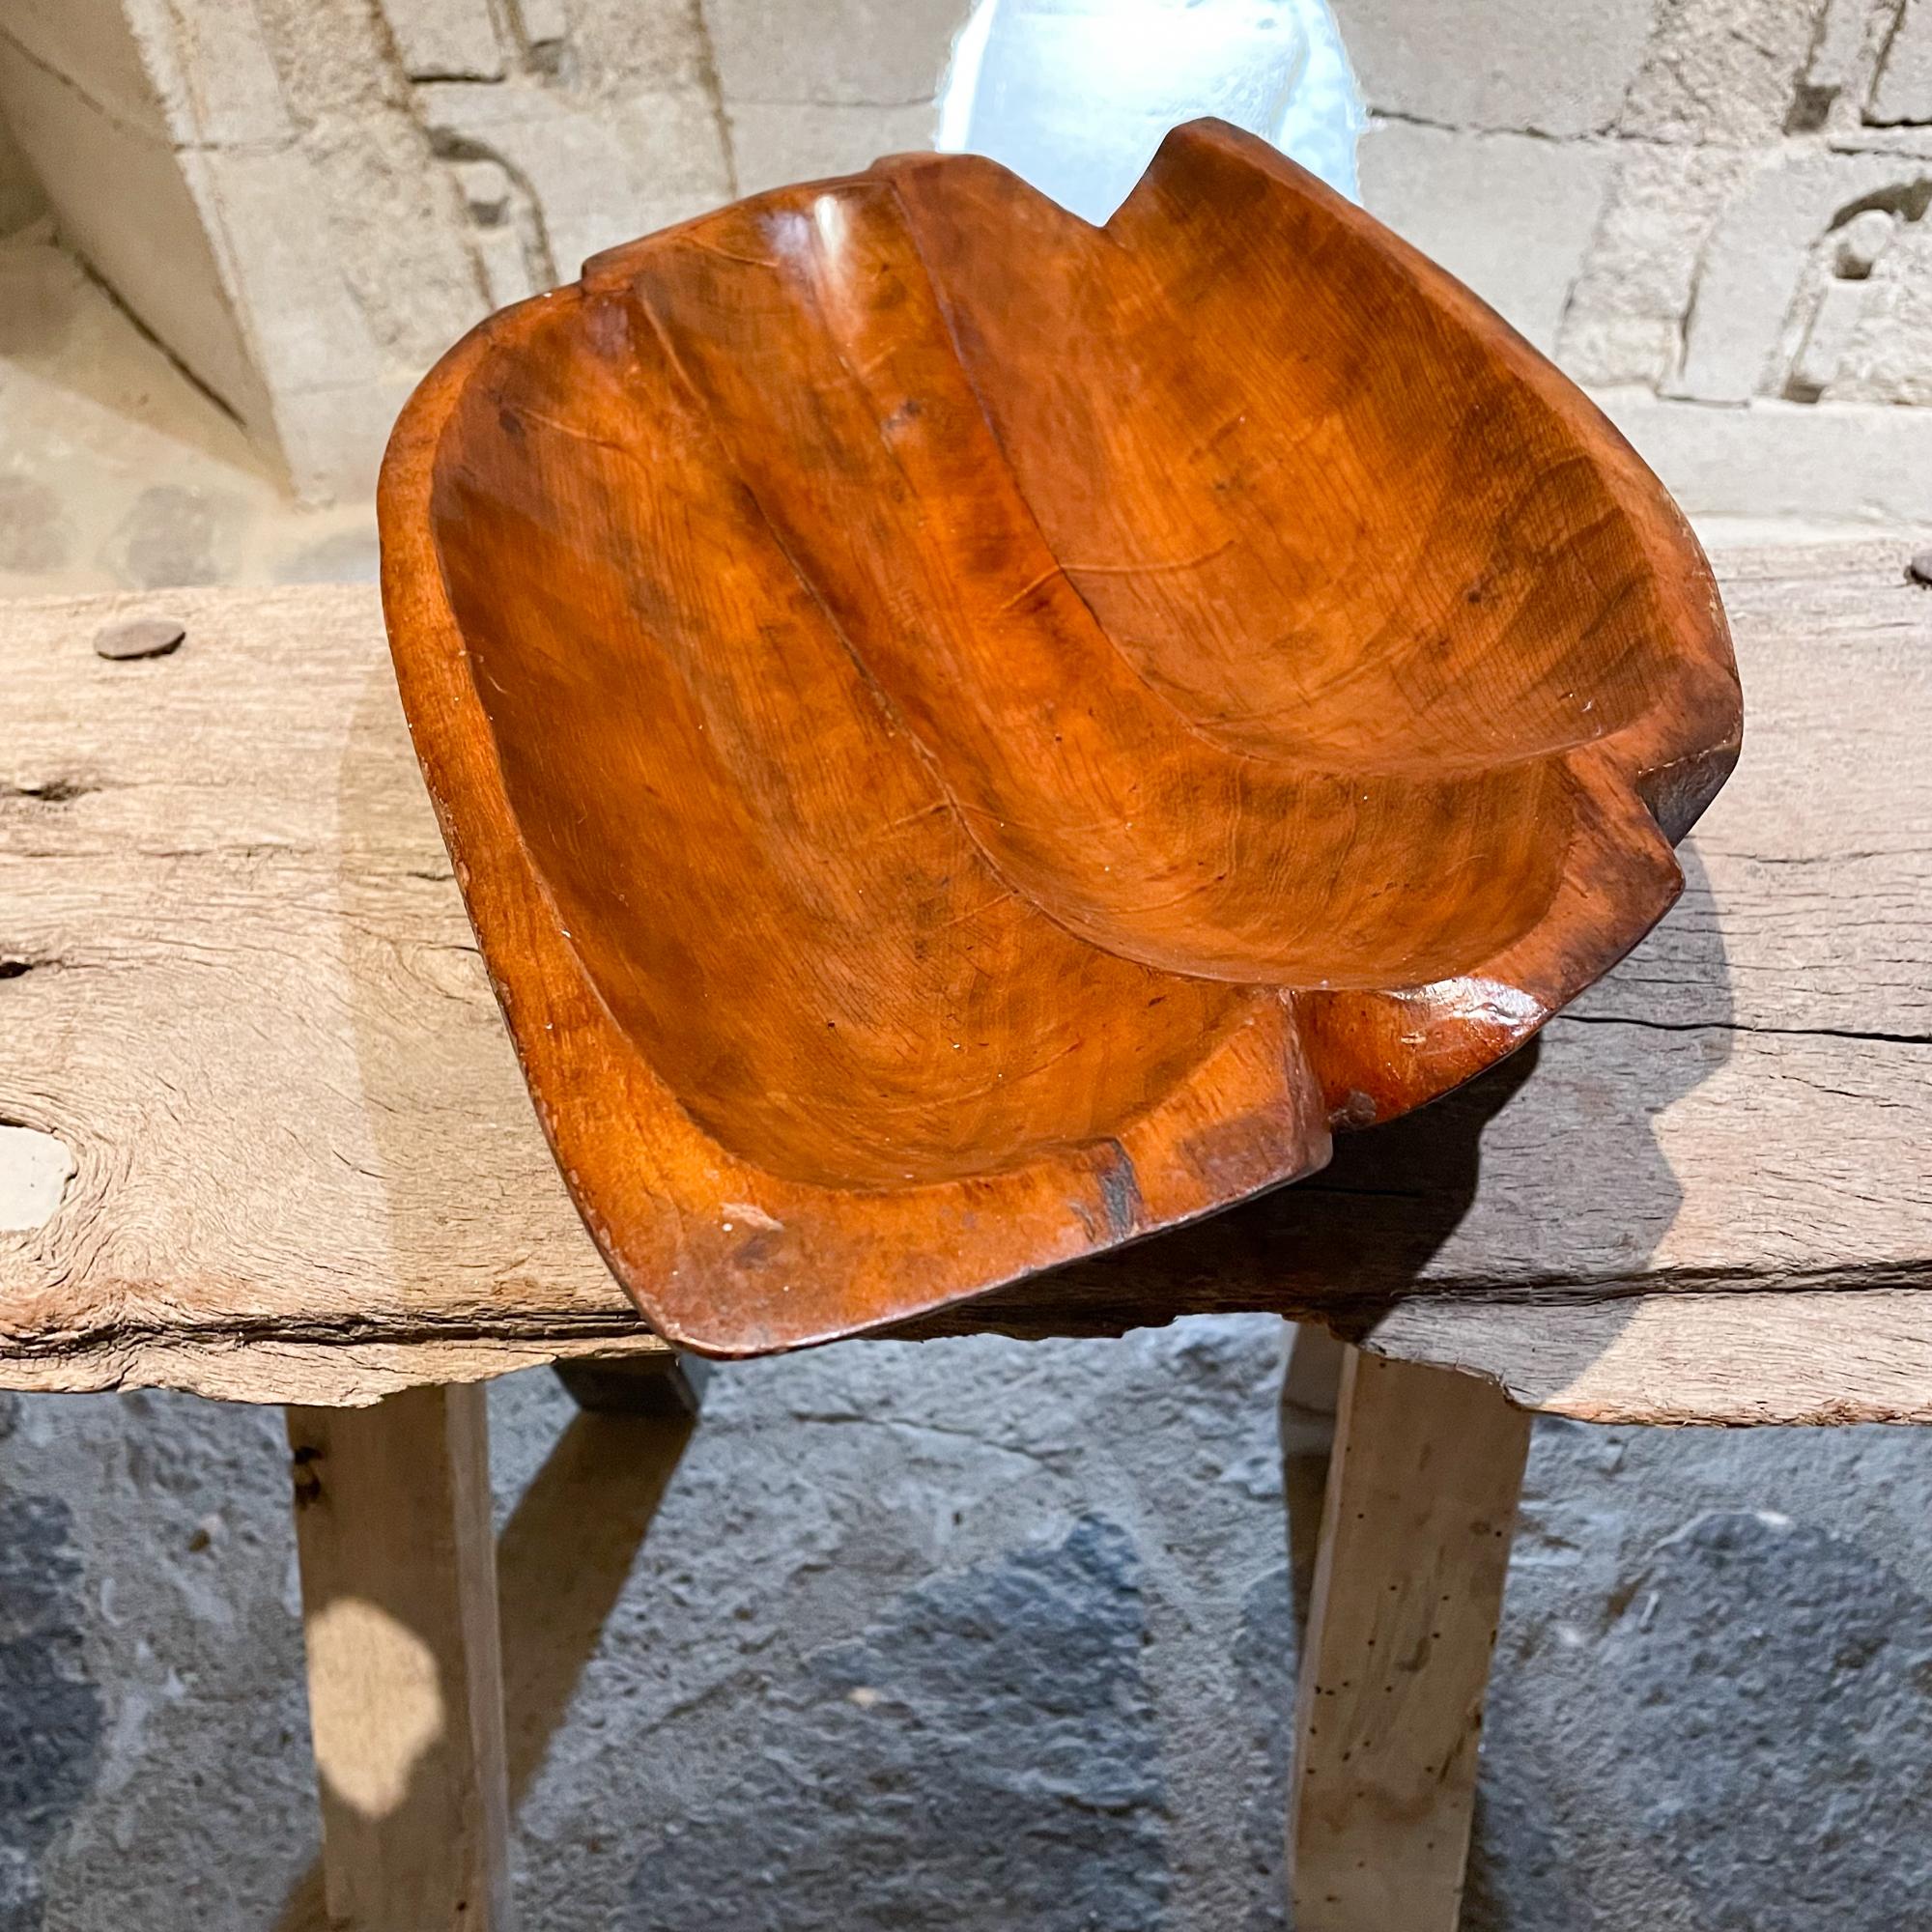 Mexican Sculptural Free Form Wood Fruit Bowl Organic Modern from Mexico, 1970s